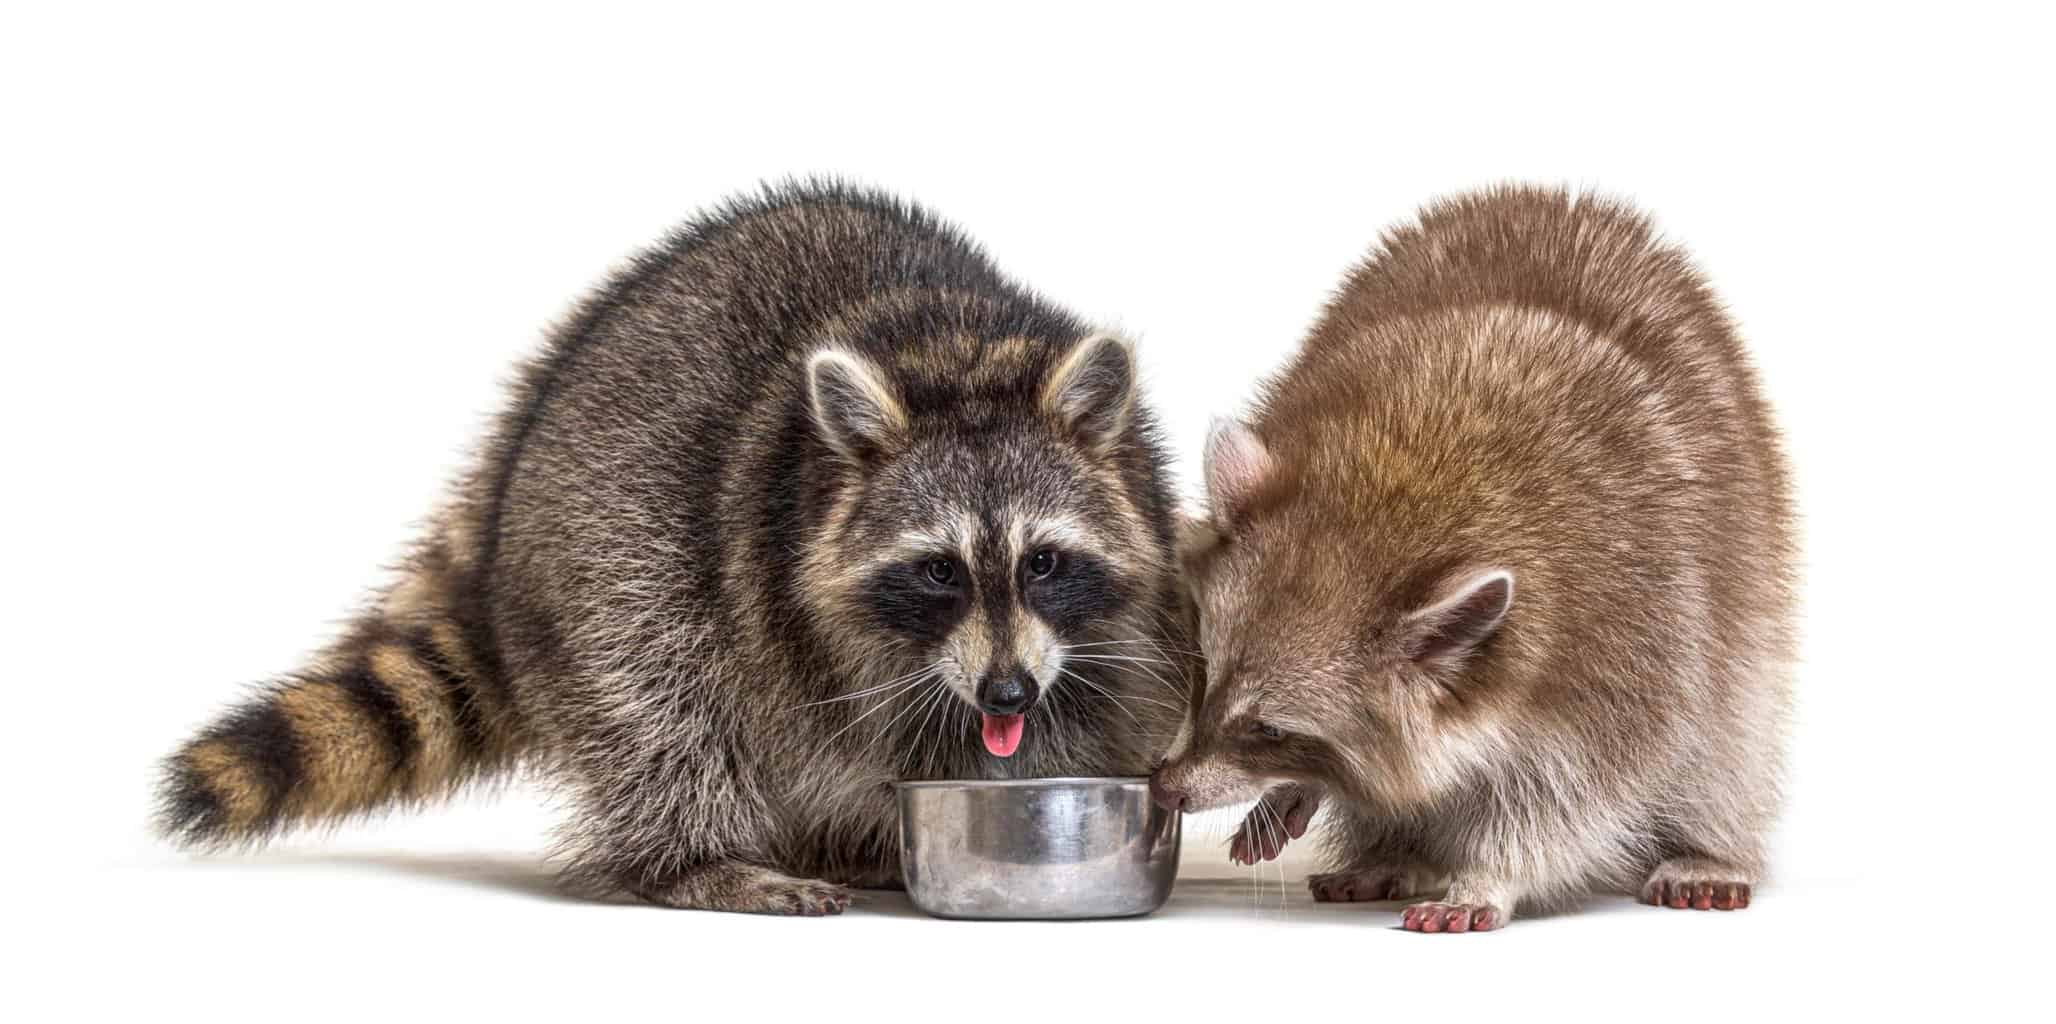 Pair of raccoons eat from dog bowl. Rather than rely on your dog to scare wildlife. Avoid temptation by bringing food and water bowls inside overnight.